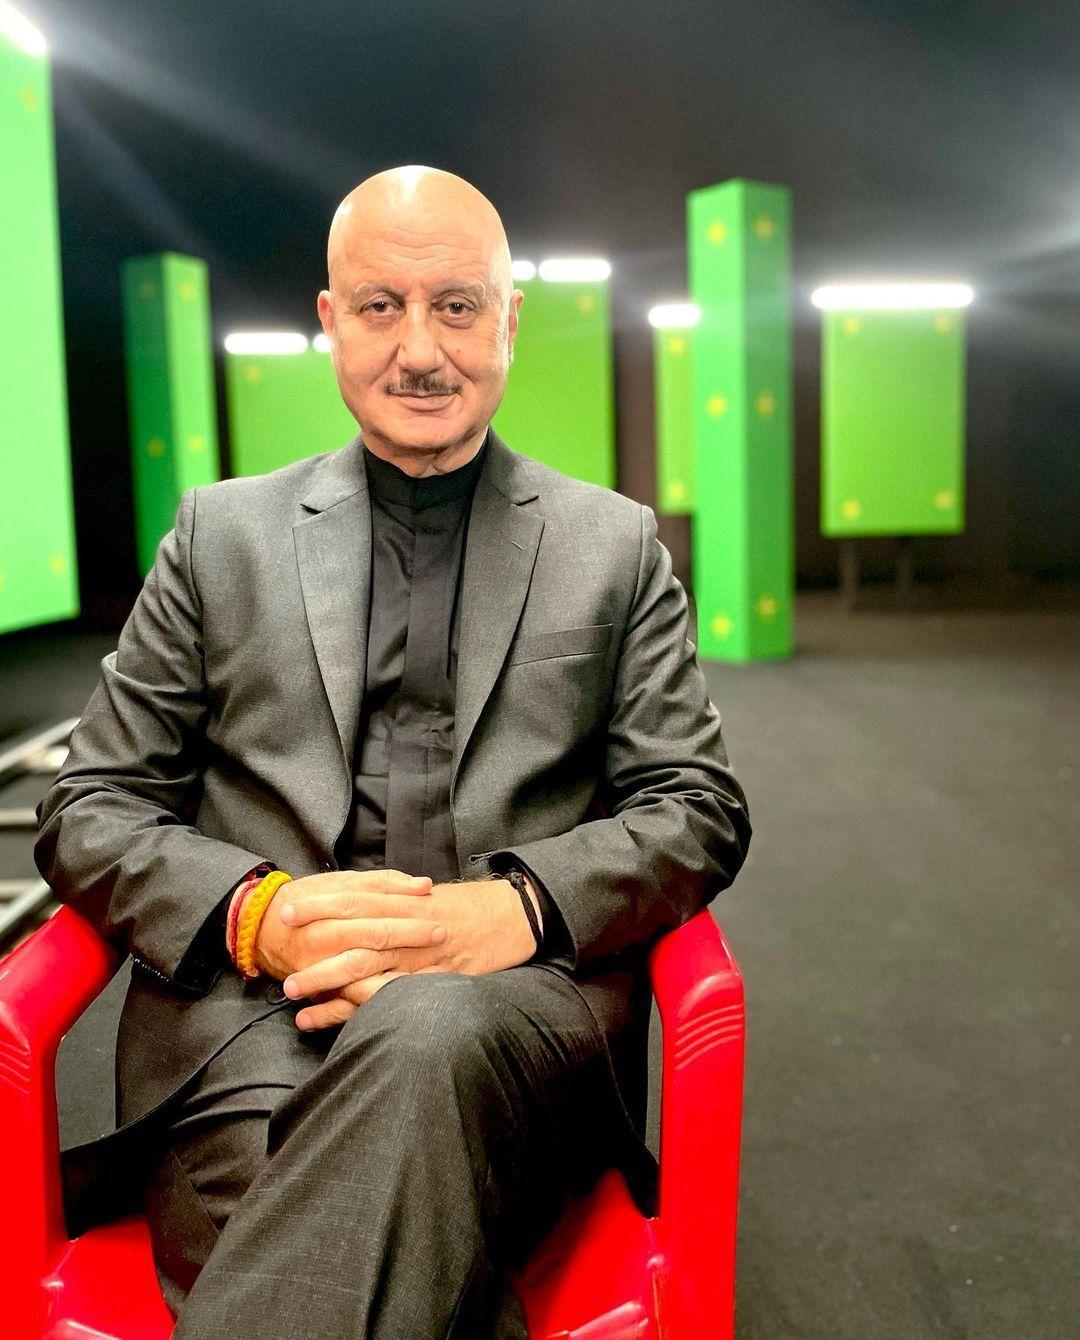 Veteran actor Anupam Kher has thanked Prime Minister Narendra Modi for his leadership and wished him good health and longevity on his birthday on Saturday. He took to Instagram where he shared a video of the Prime Minister taking oath. Read full story here